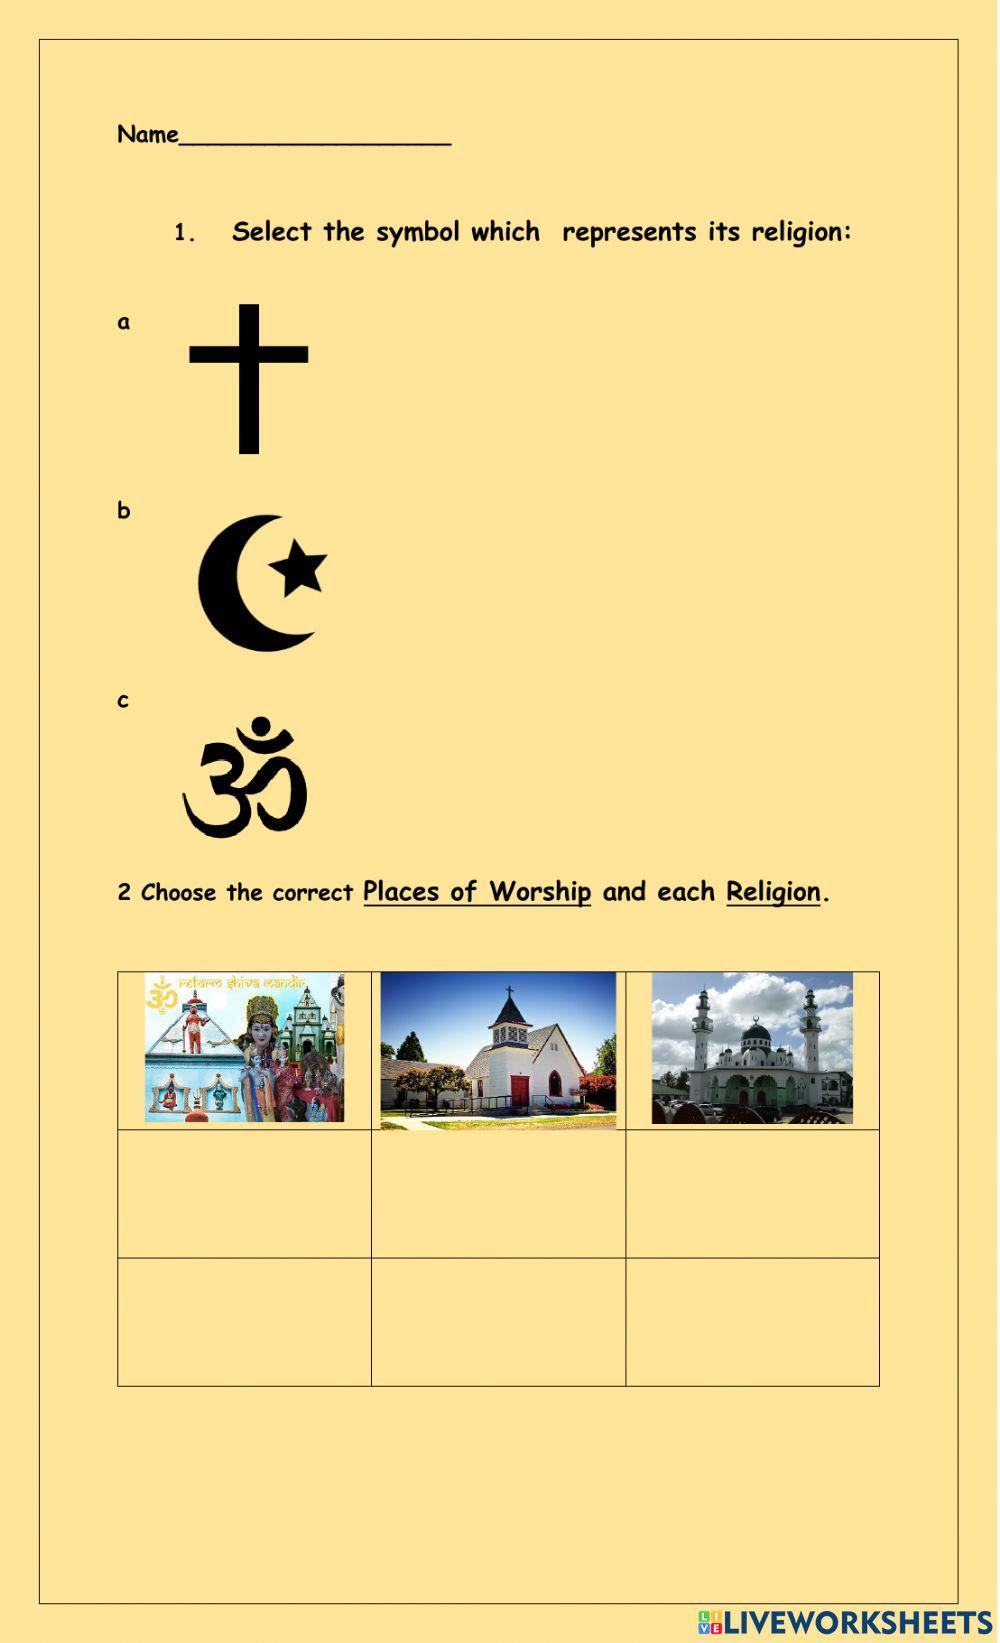 Religious Symbols and Places of Worship Revision